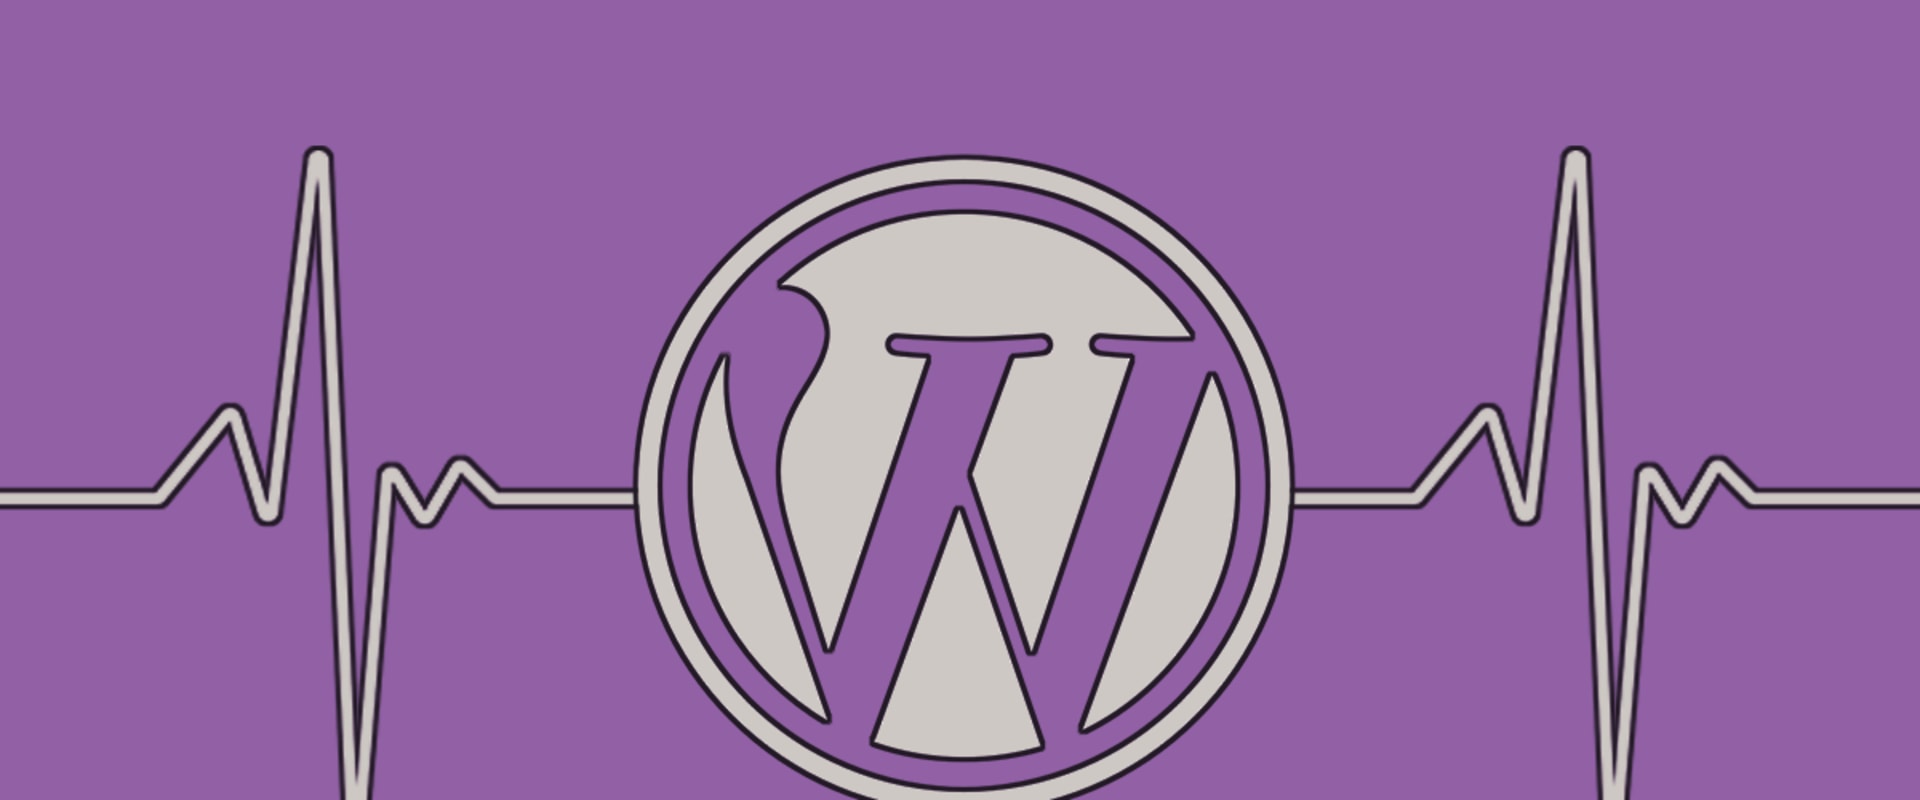 WordPress: An Opportunity for Web Developers, Not a Threat